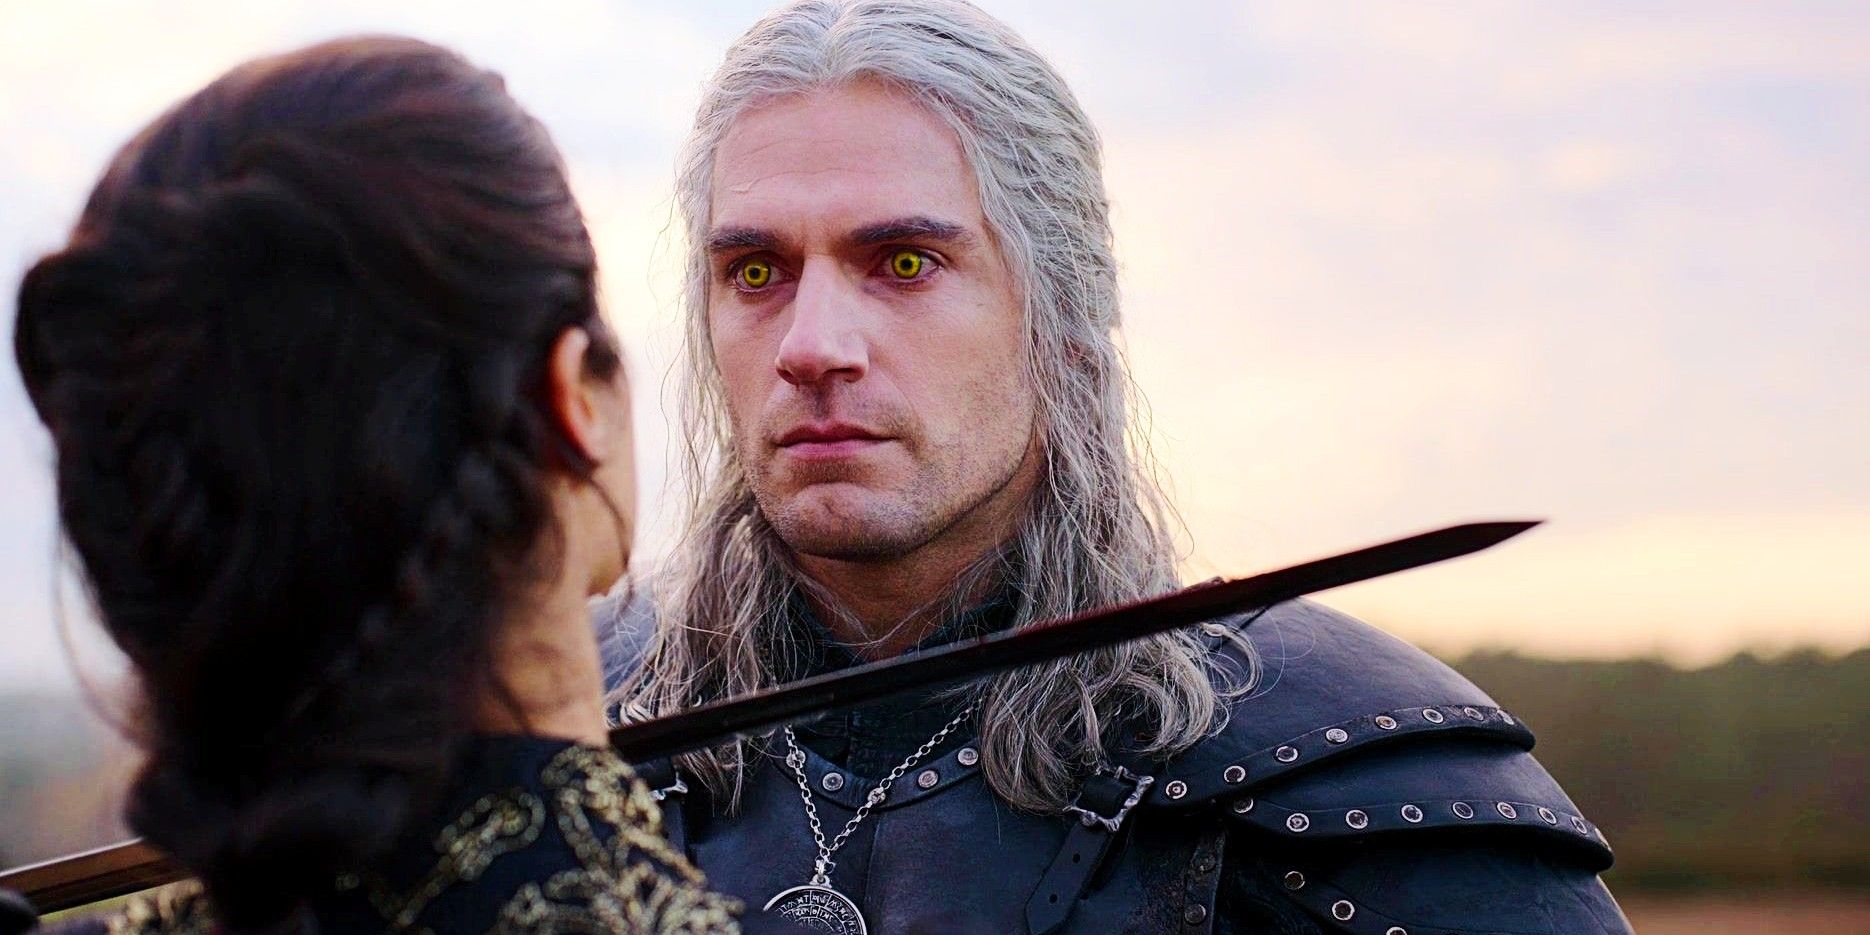 Henry_Cavill_as_Geralt_Holds_A_Sword_To_Yennefers_Throat_in_The_Witcher_Season_2_Episode_7